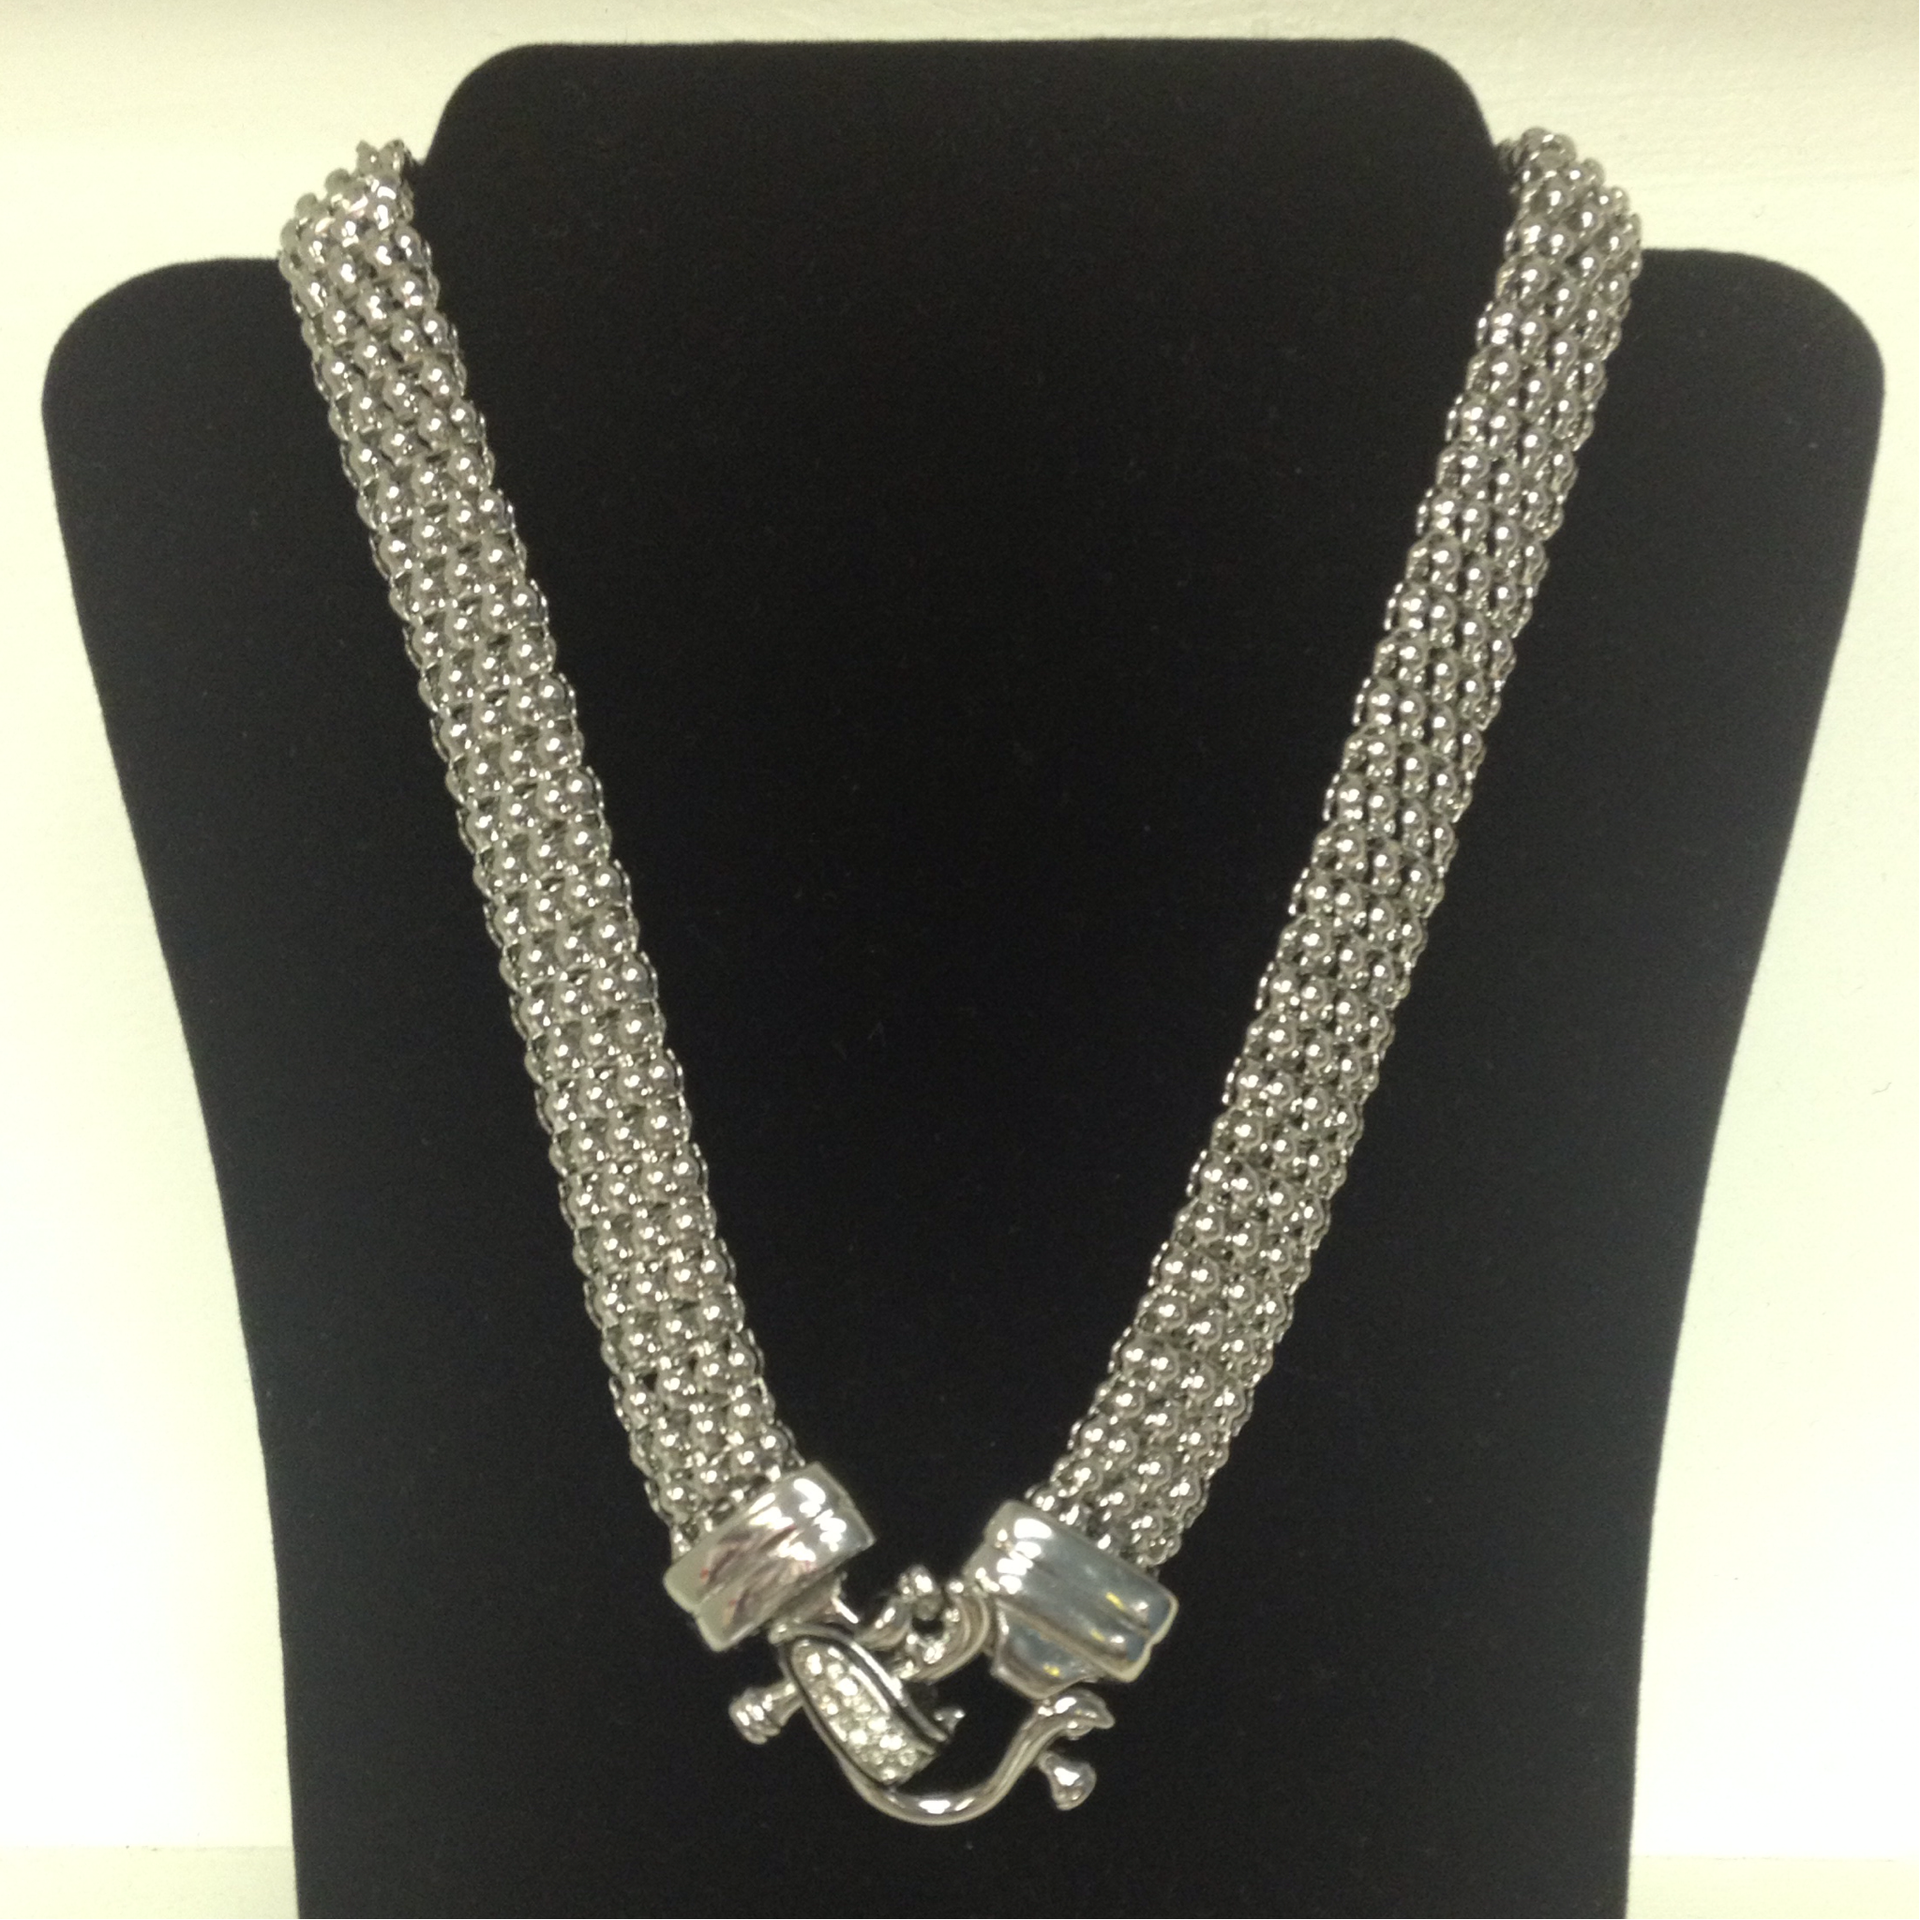 Silver necklace with Rhinestone clamp in  front $39